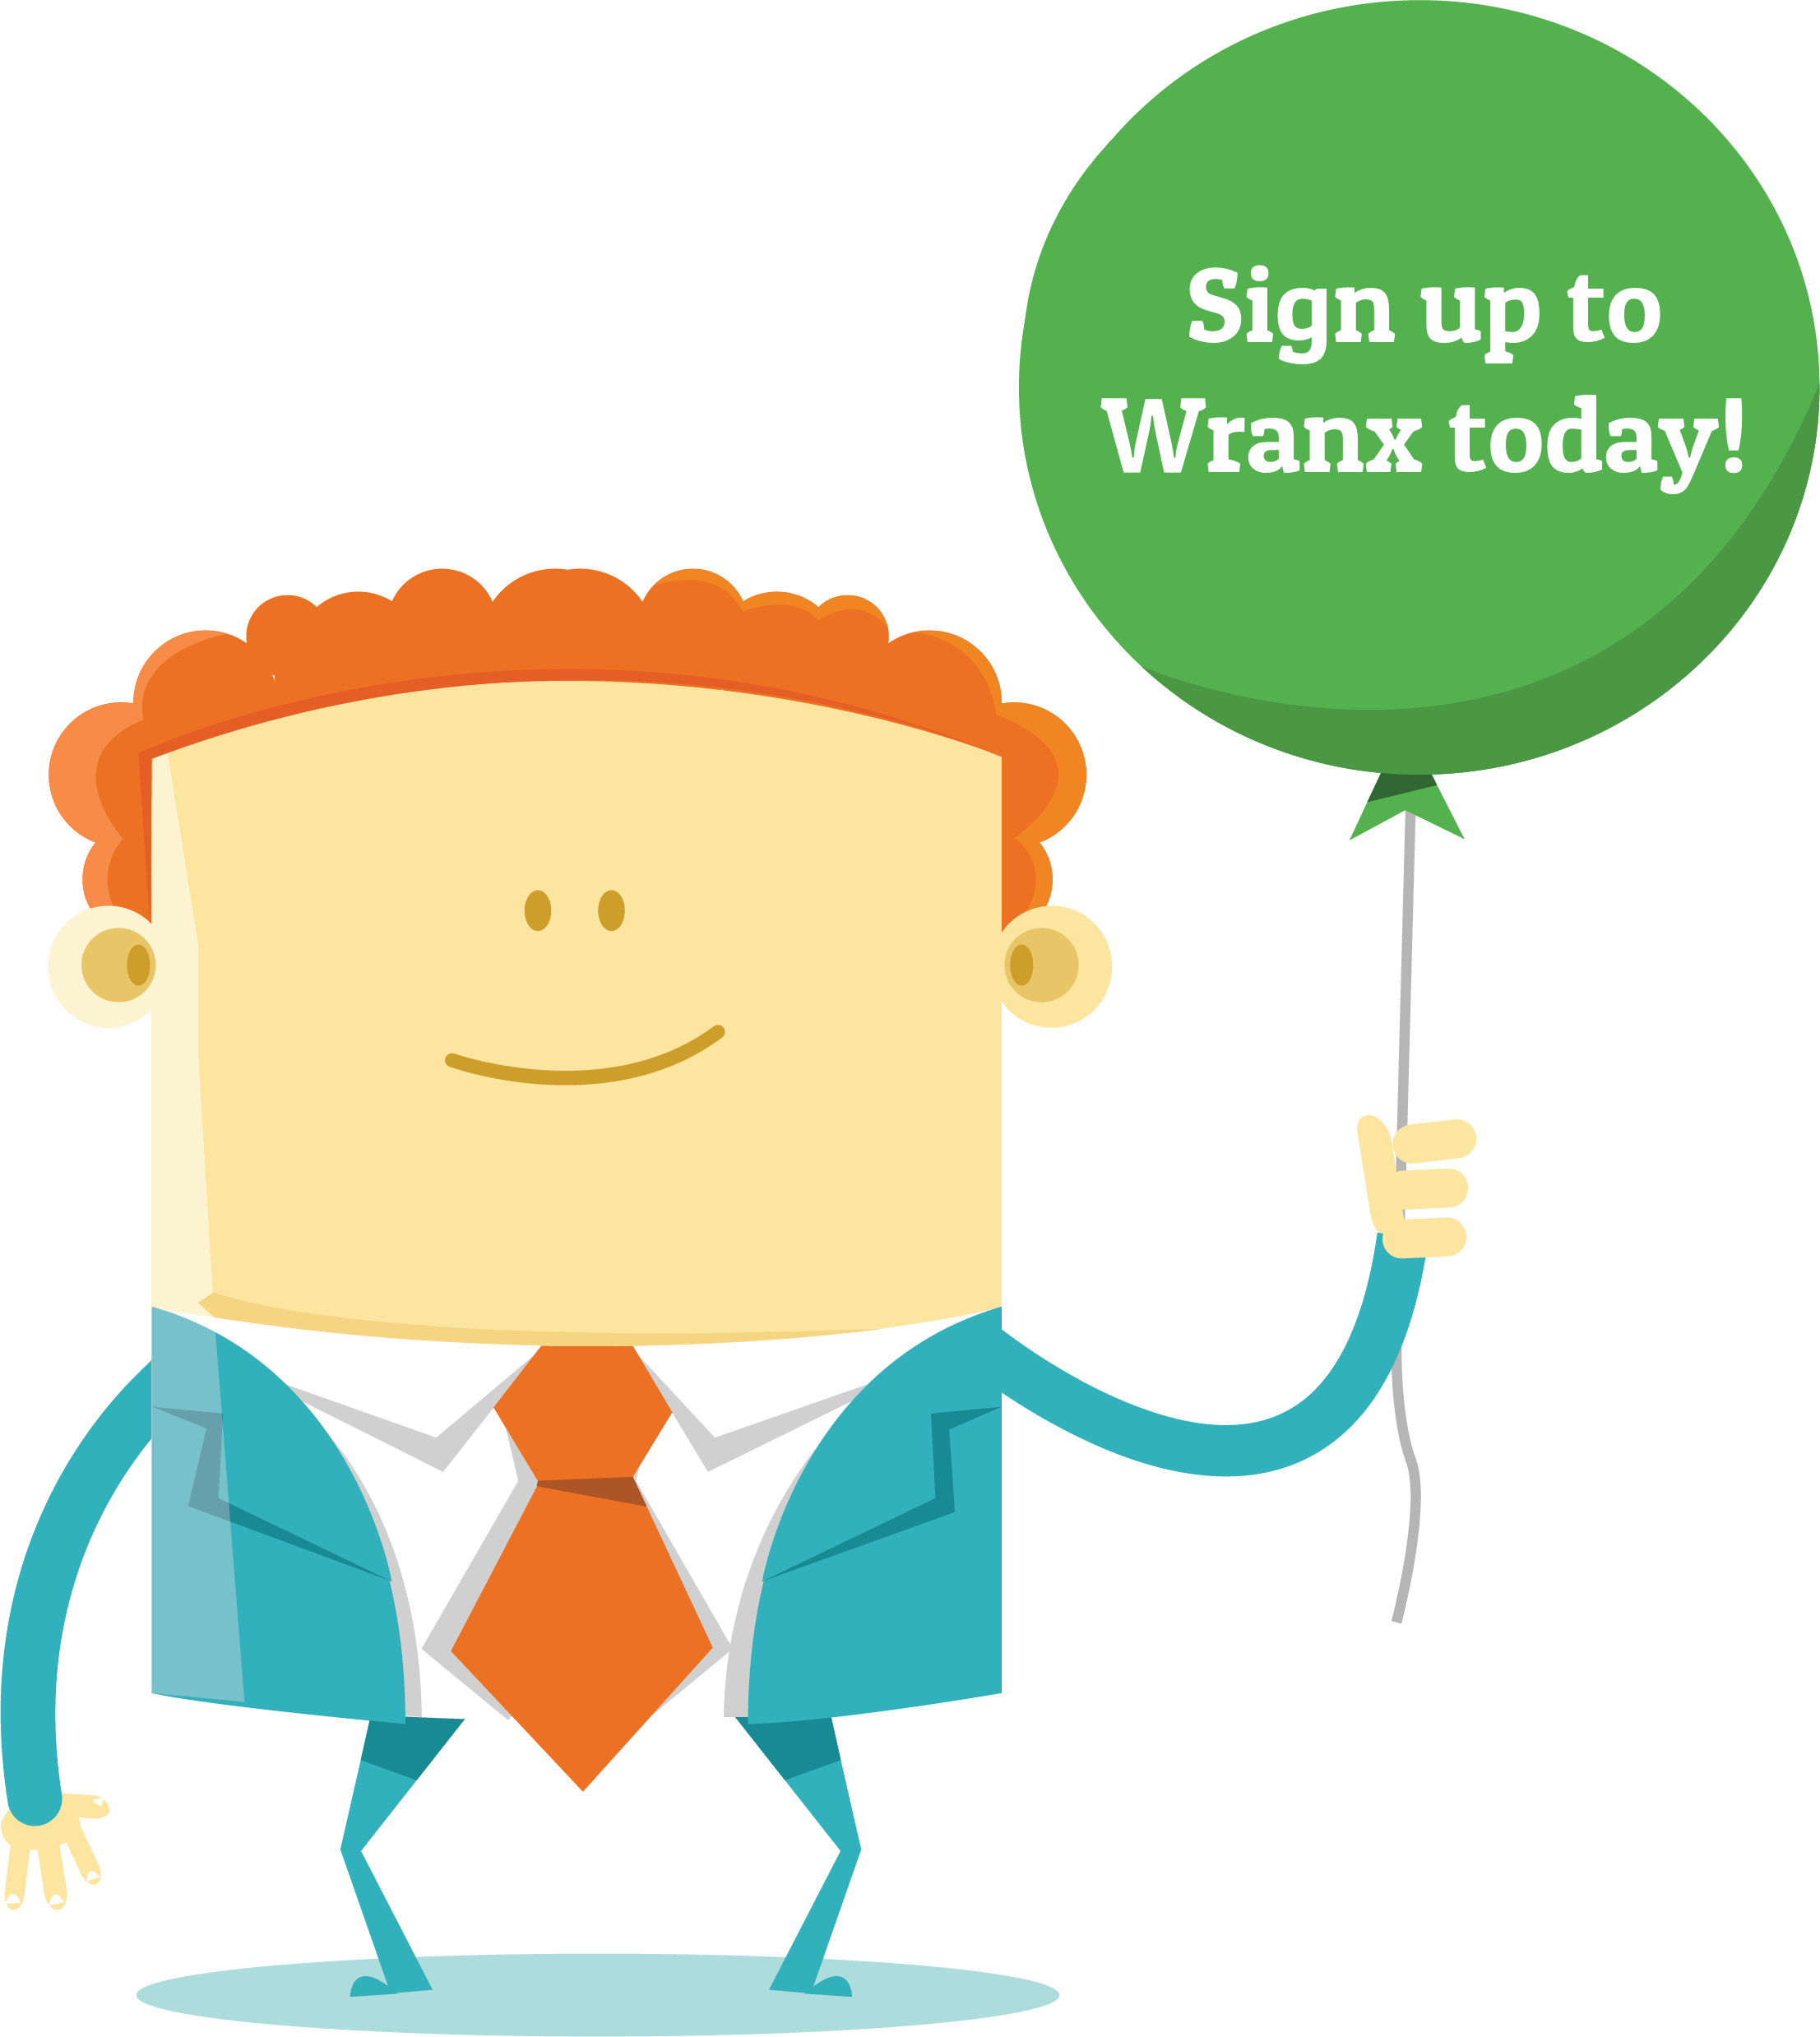 Sign up to Wranx